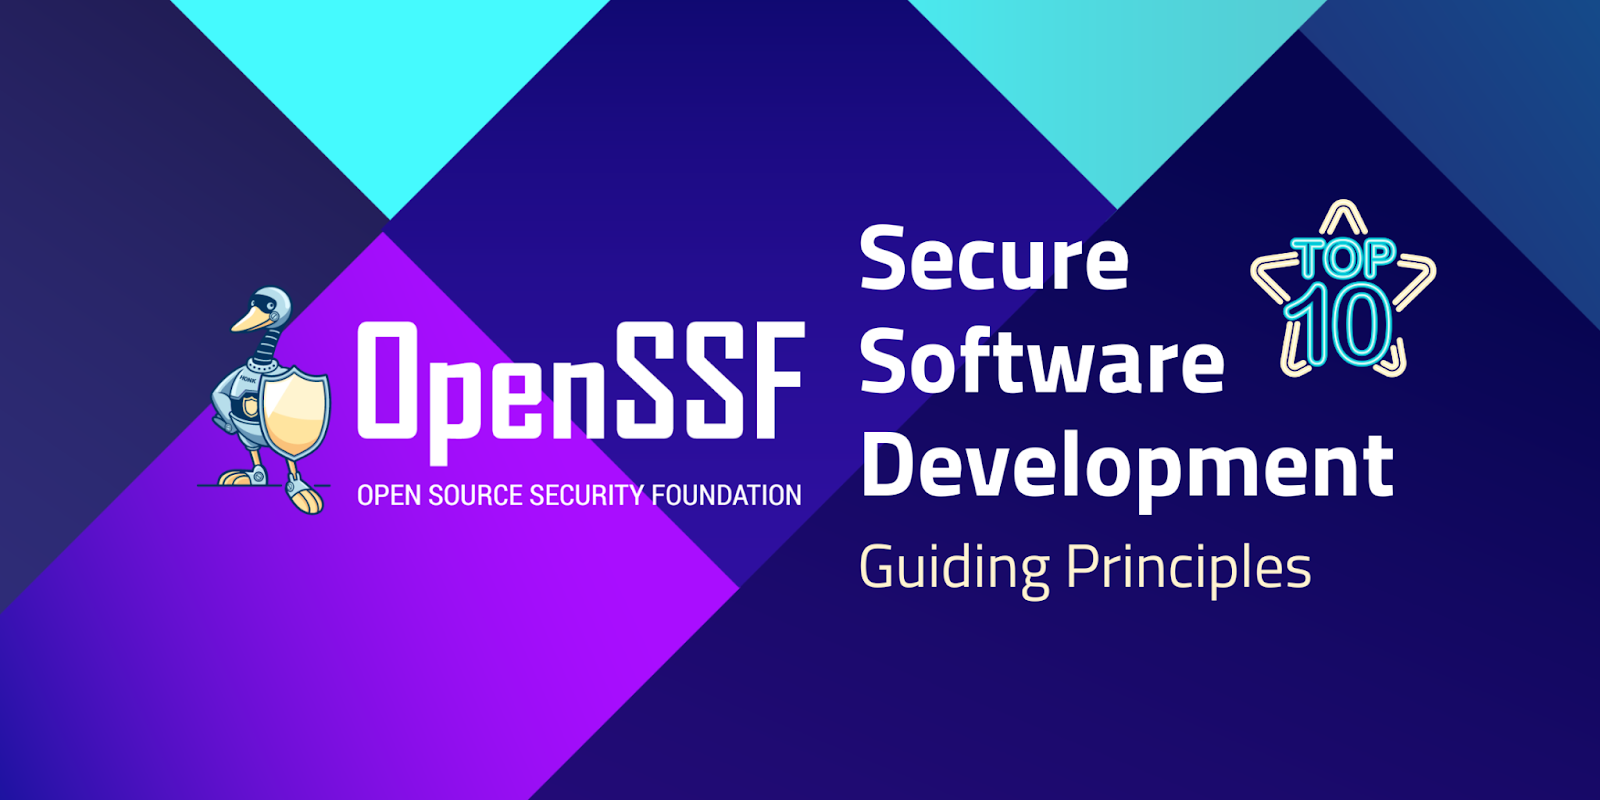 OpenSSF Releases Top 10 Secure Software Development Guiding Principles